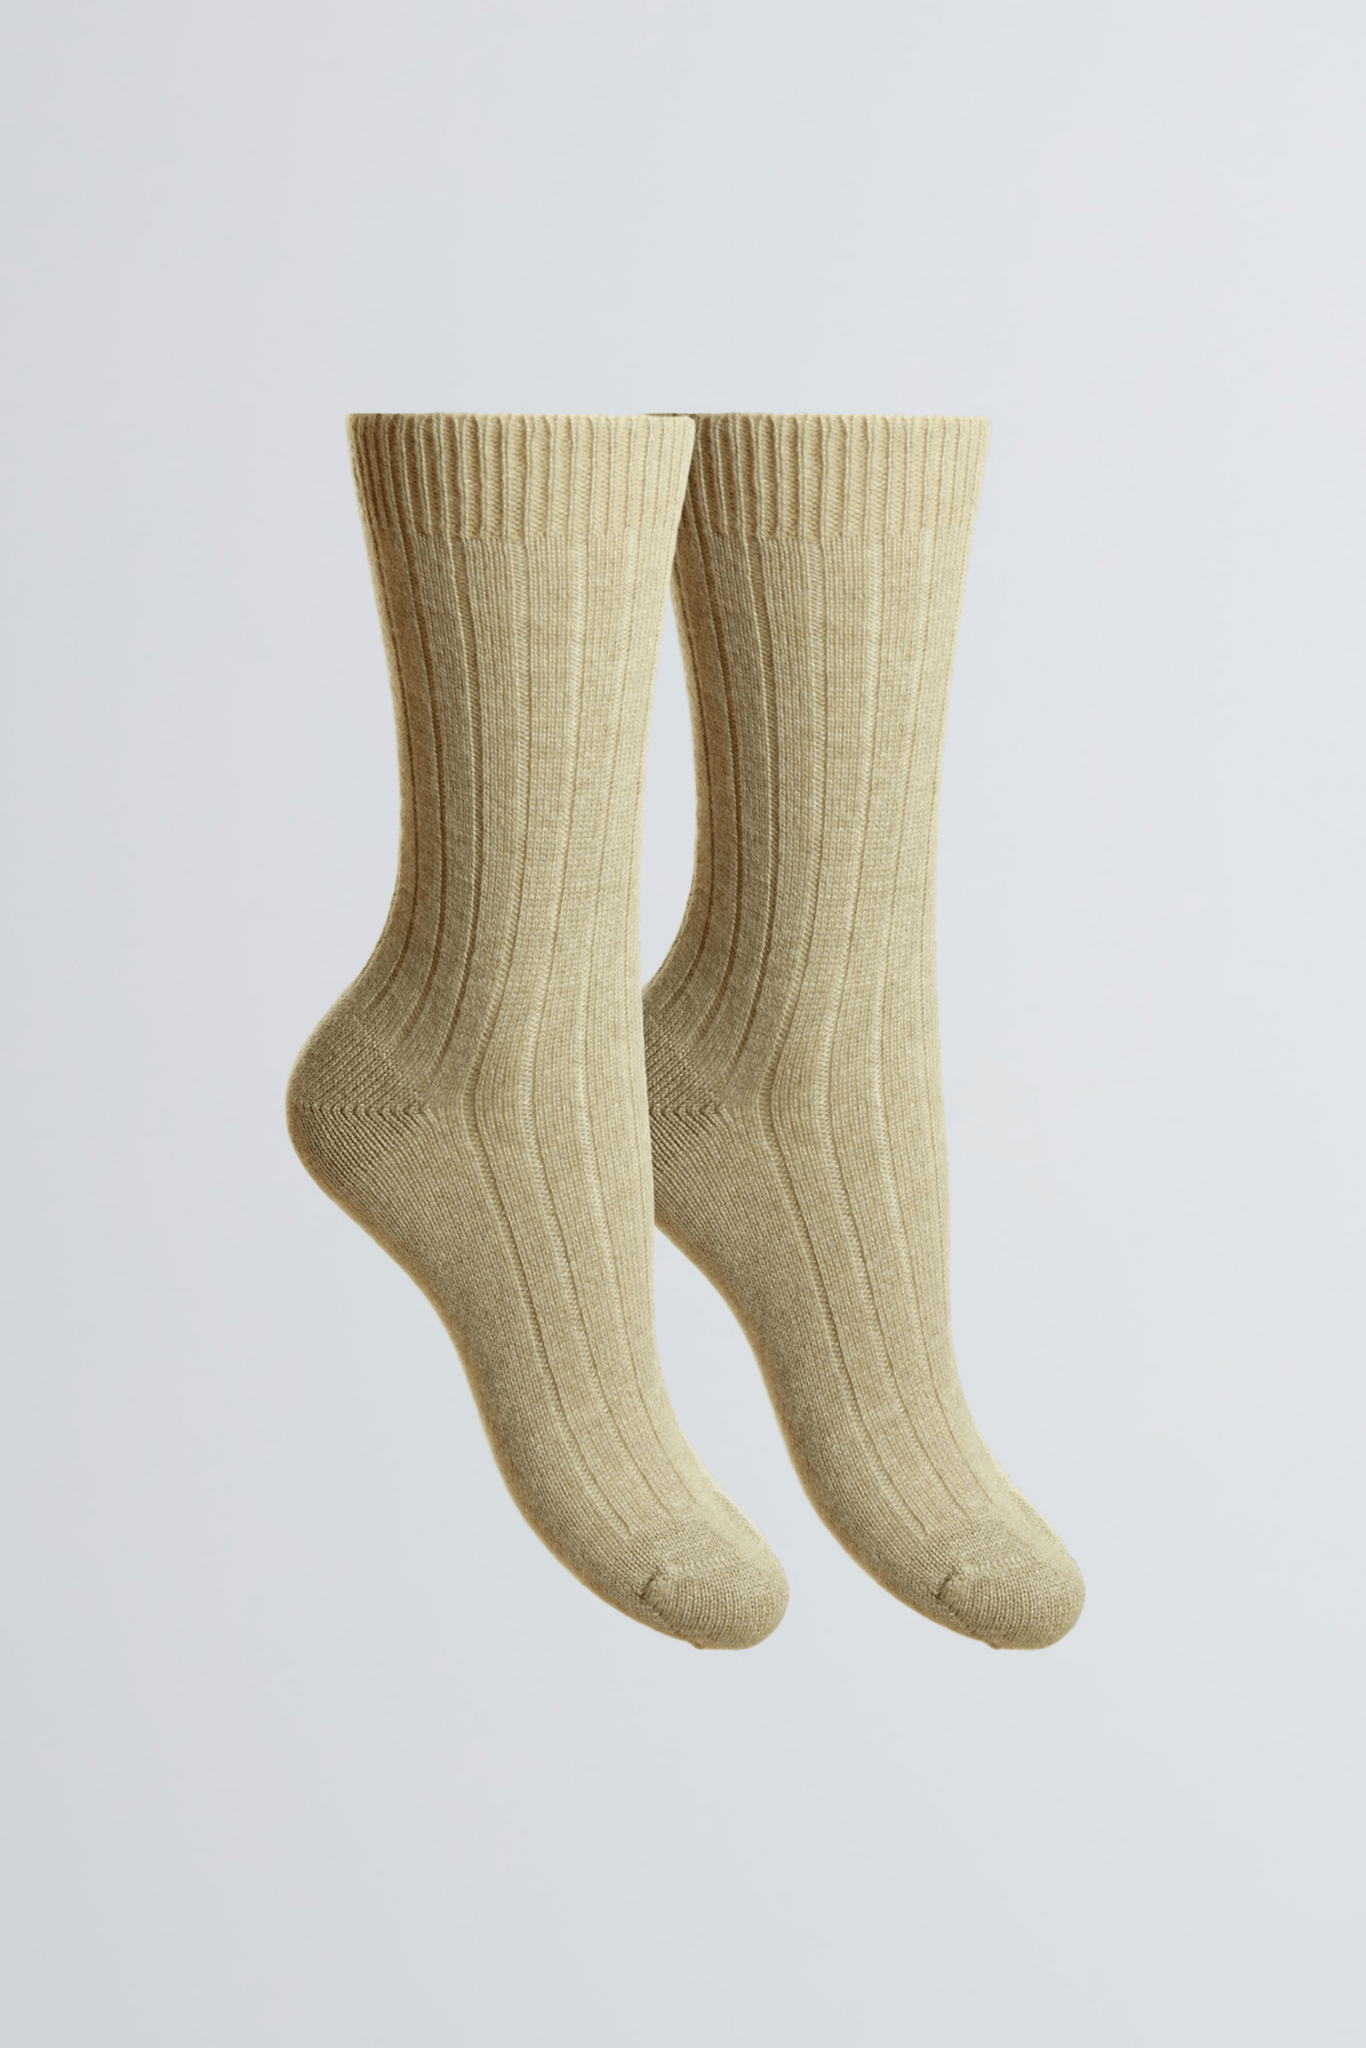 Soft Scottish Cashmere Women's Socks - Comfortable natural Socks by Lavender Hill Clothing - Cozy Bed Socks